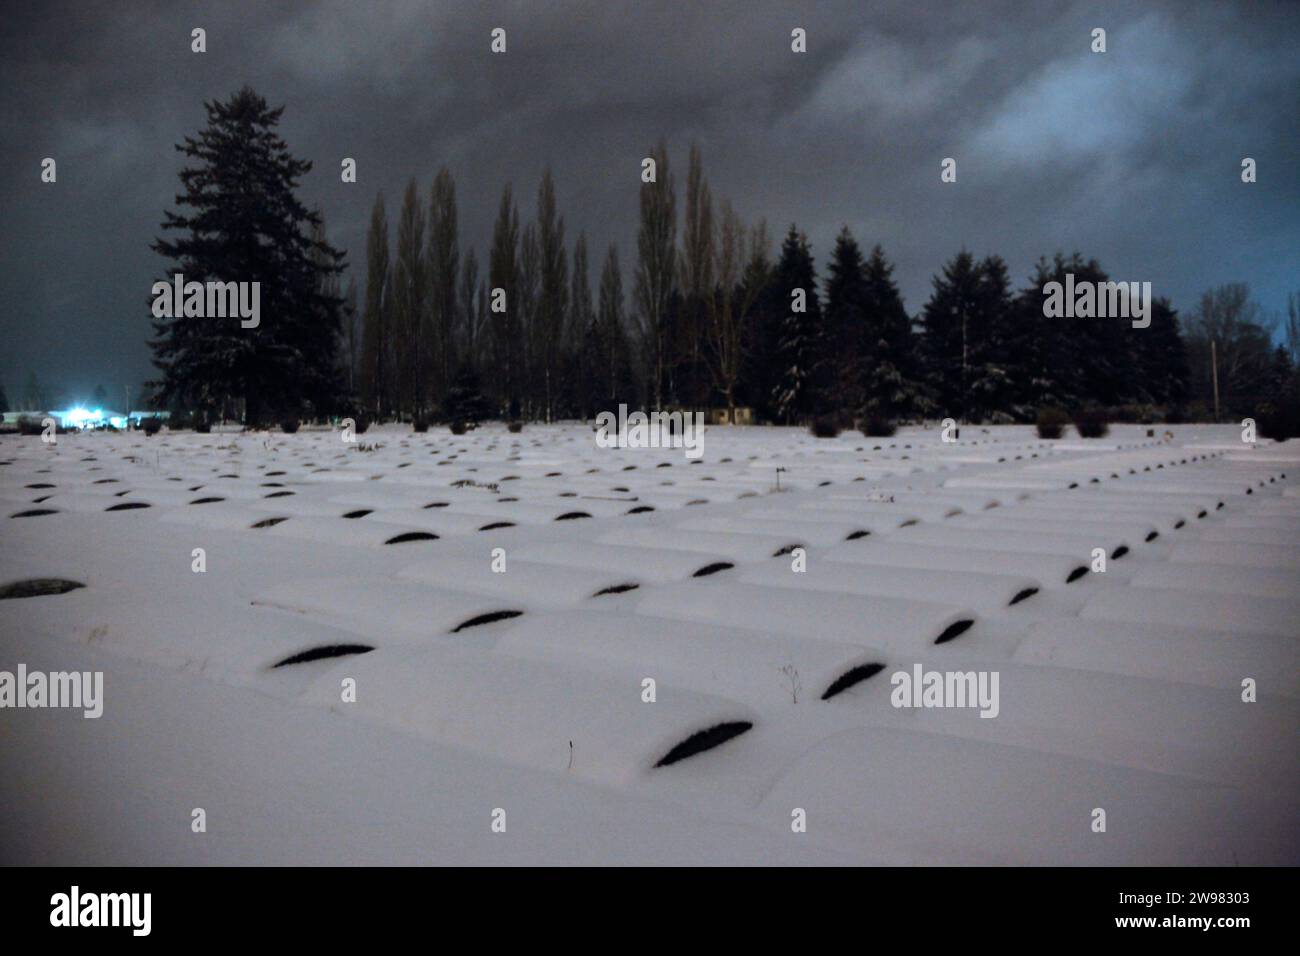 Symmetrical cemetery plots are covered in snow at night in Washington. Stock Photo